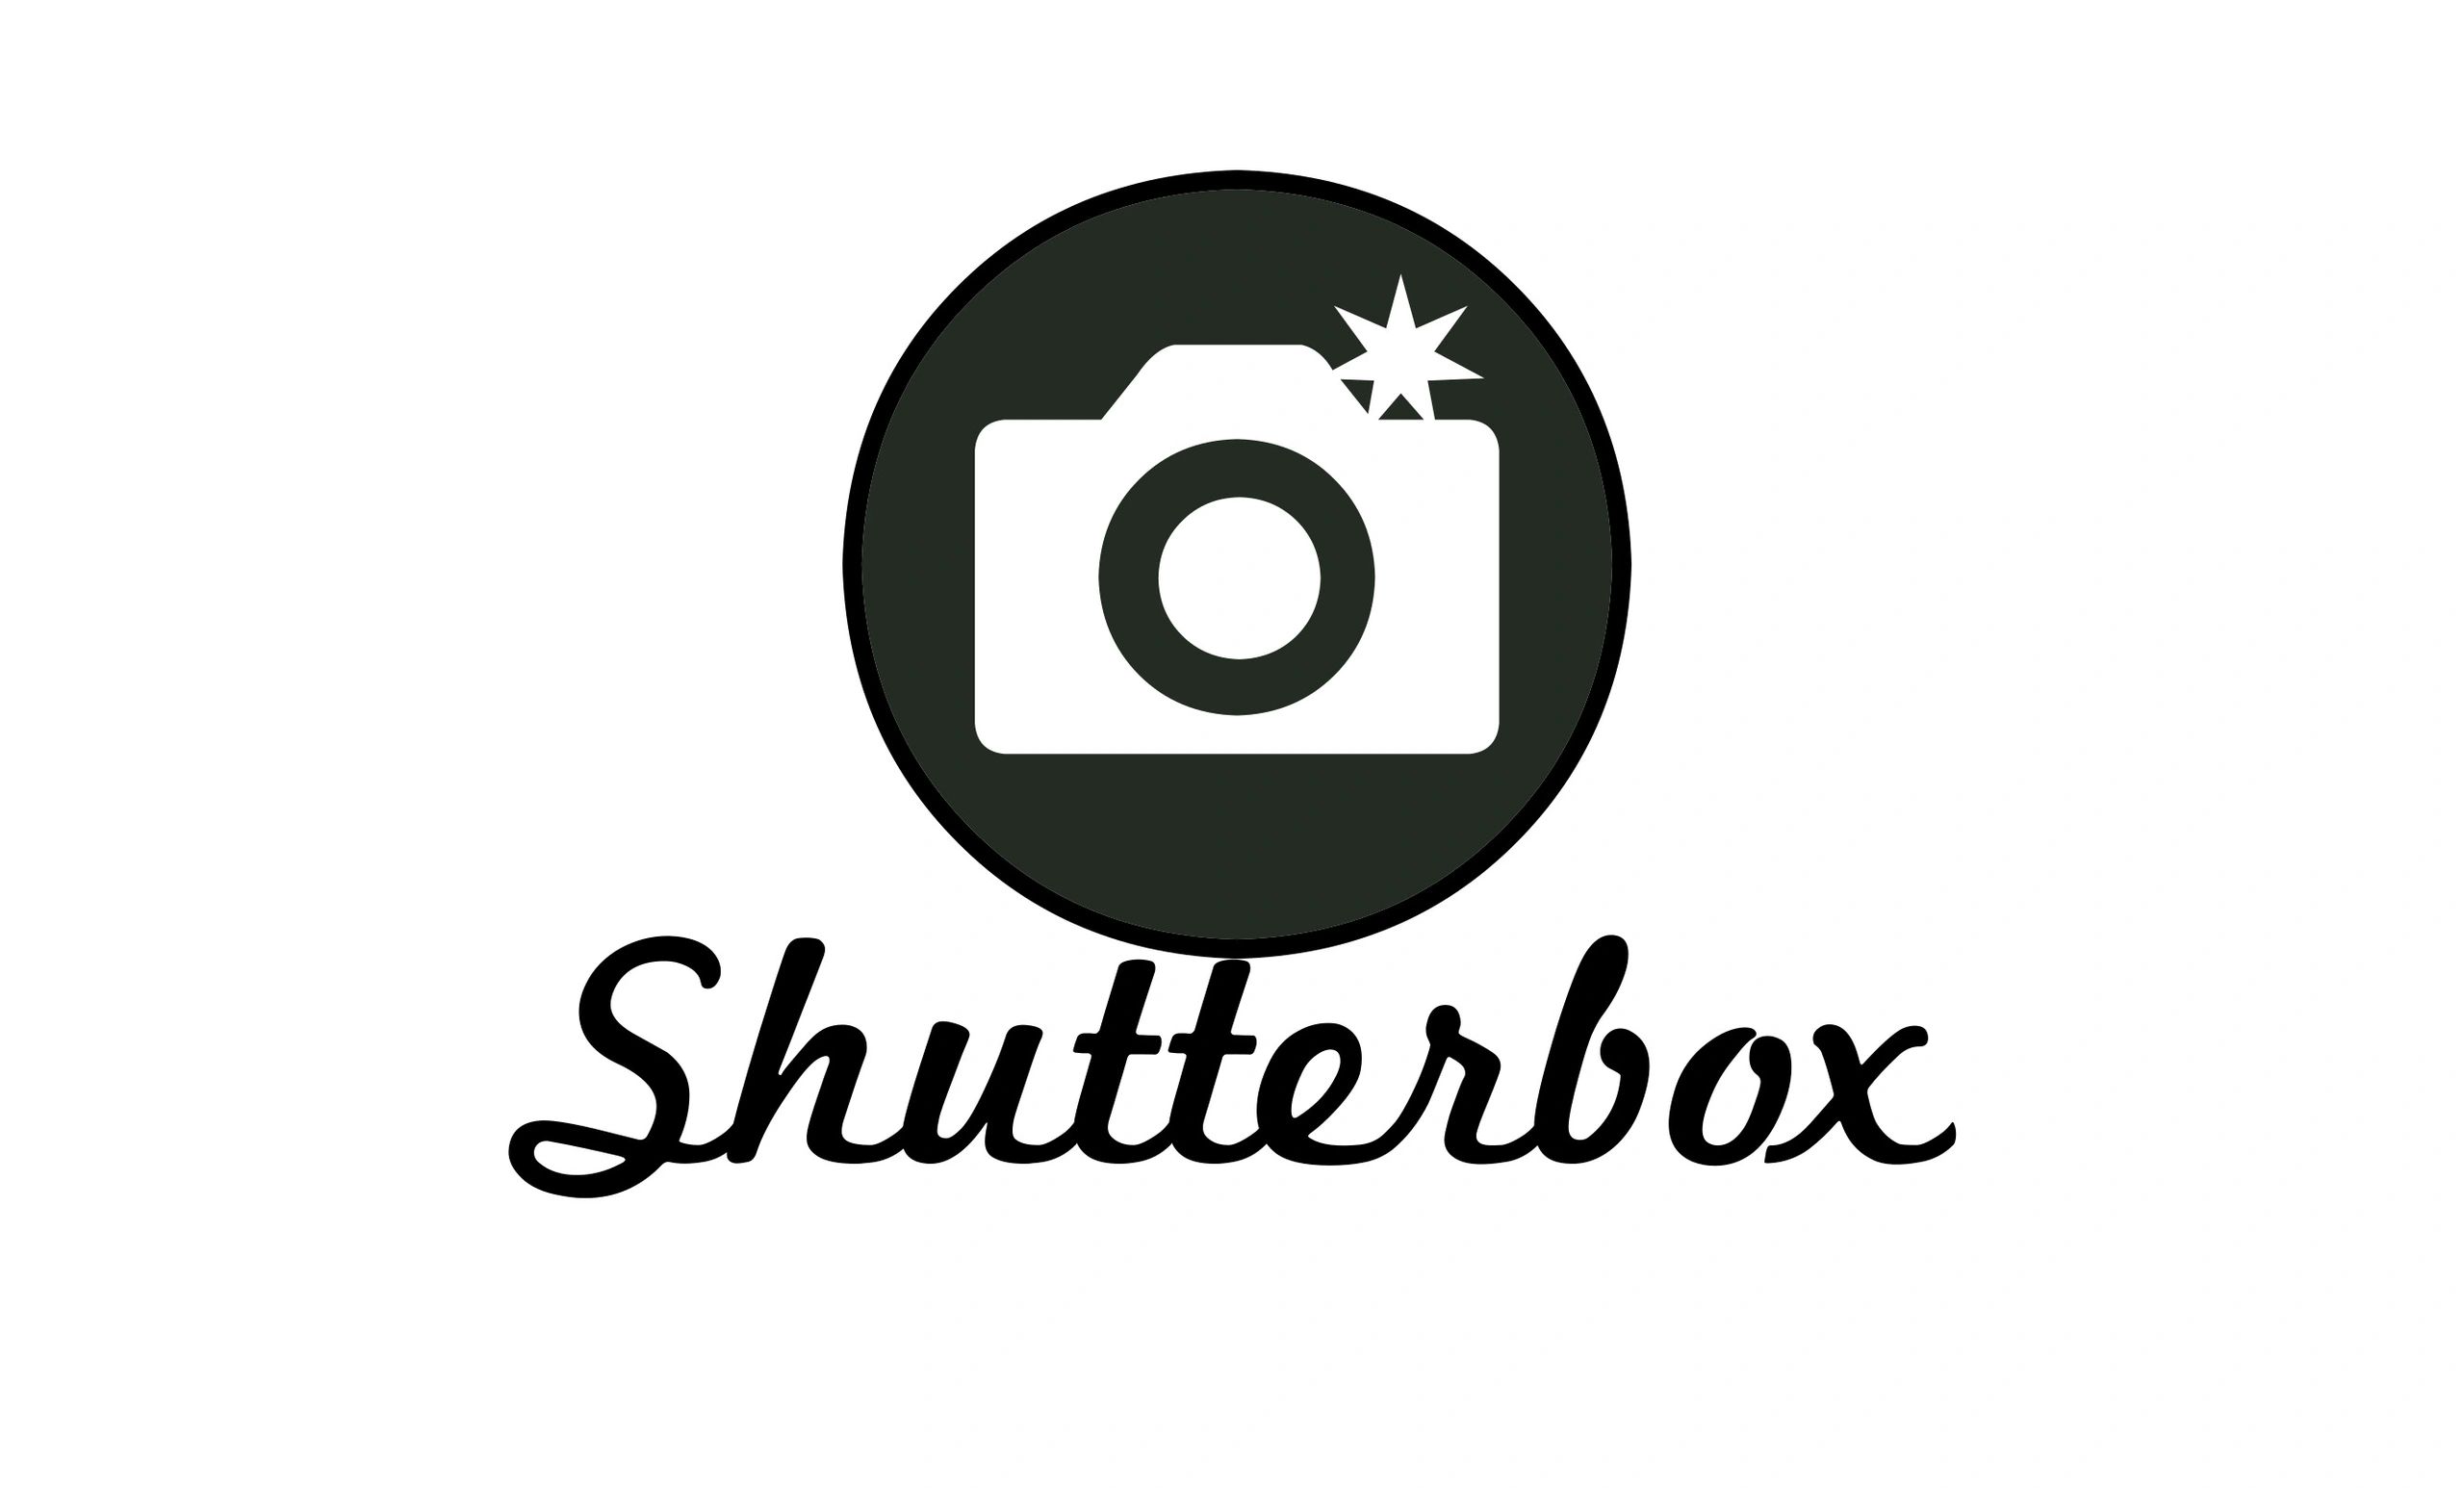 Shutterbox events